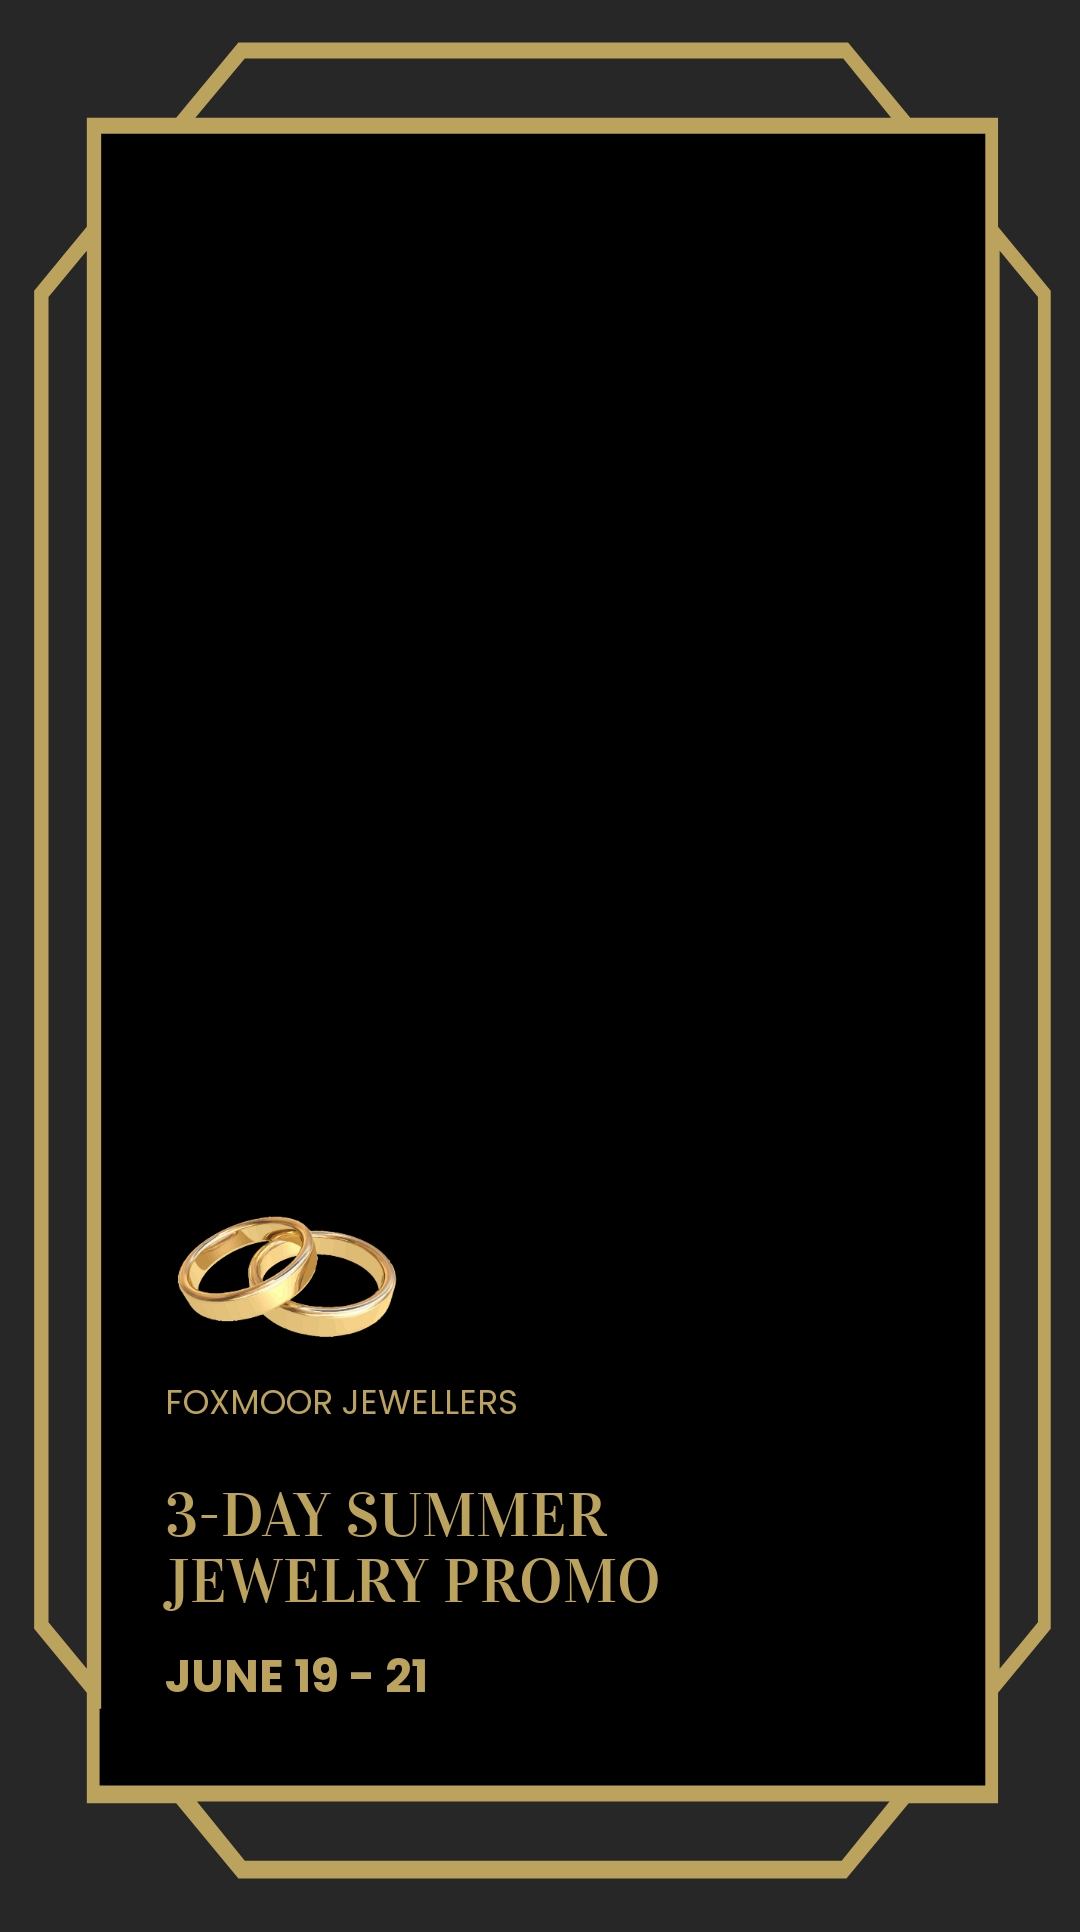 Jewelry Promotion Snapchat Geofilter